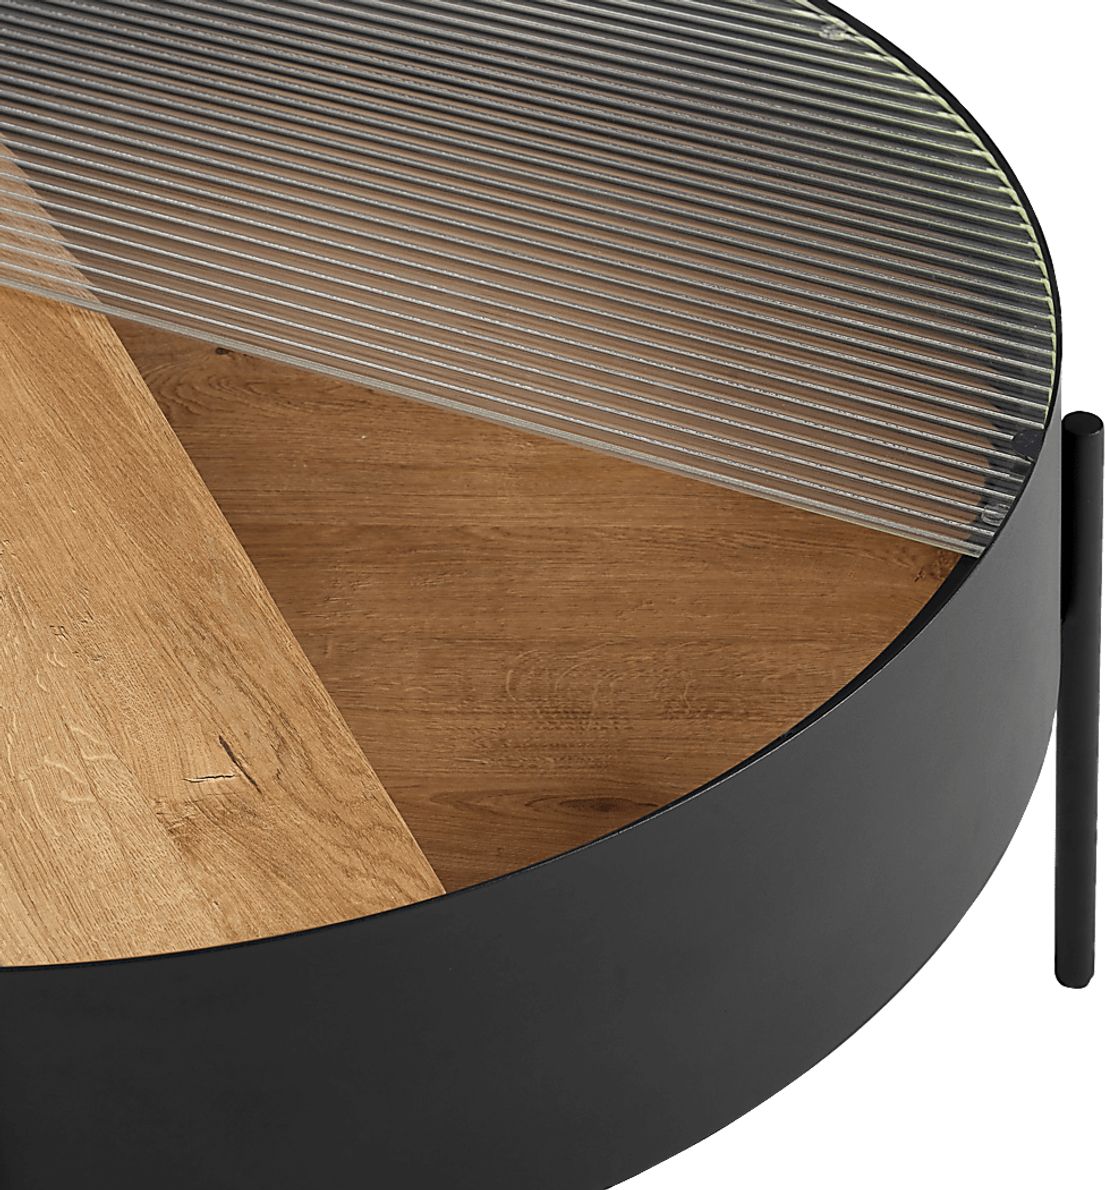 Solabell Black Cocktail Table